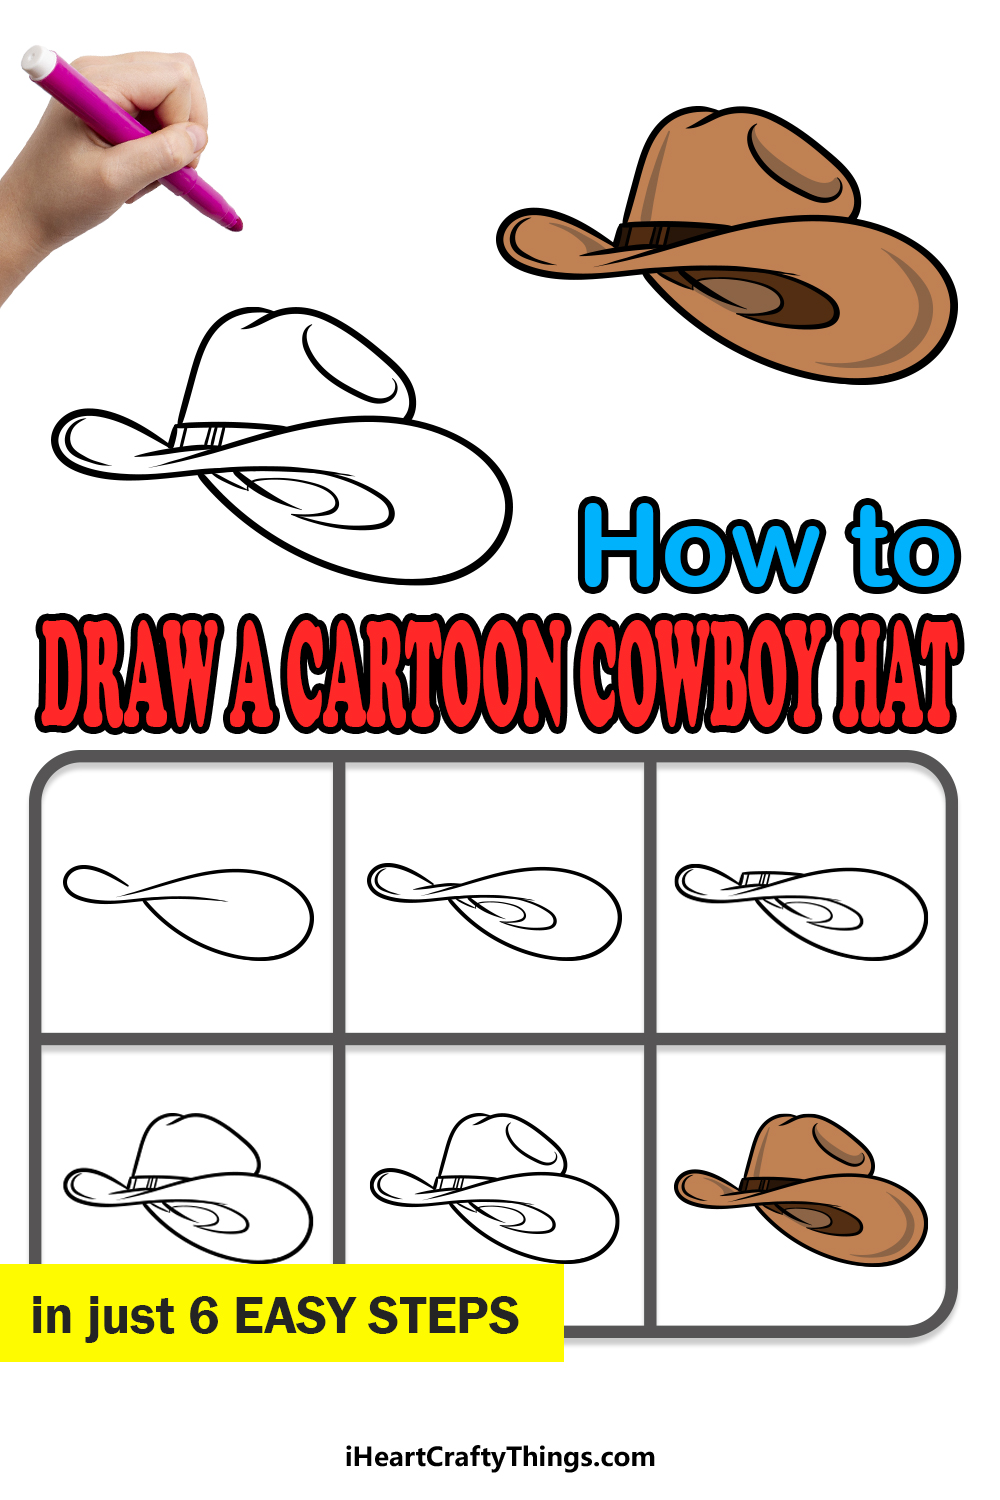 how to draw a cartoon cowboy hat in 6 easy steps